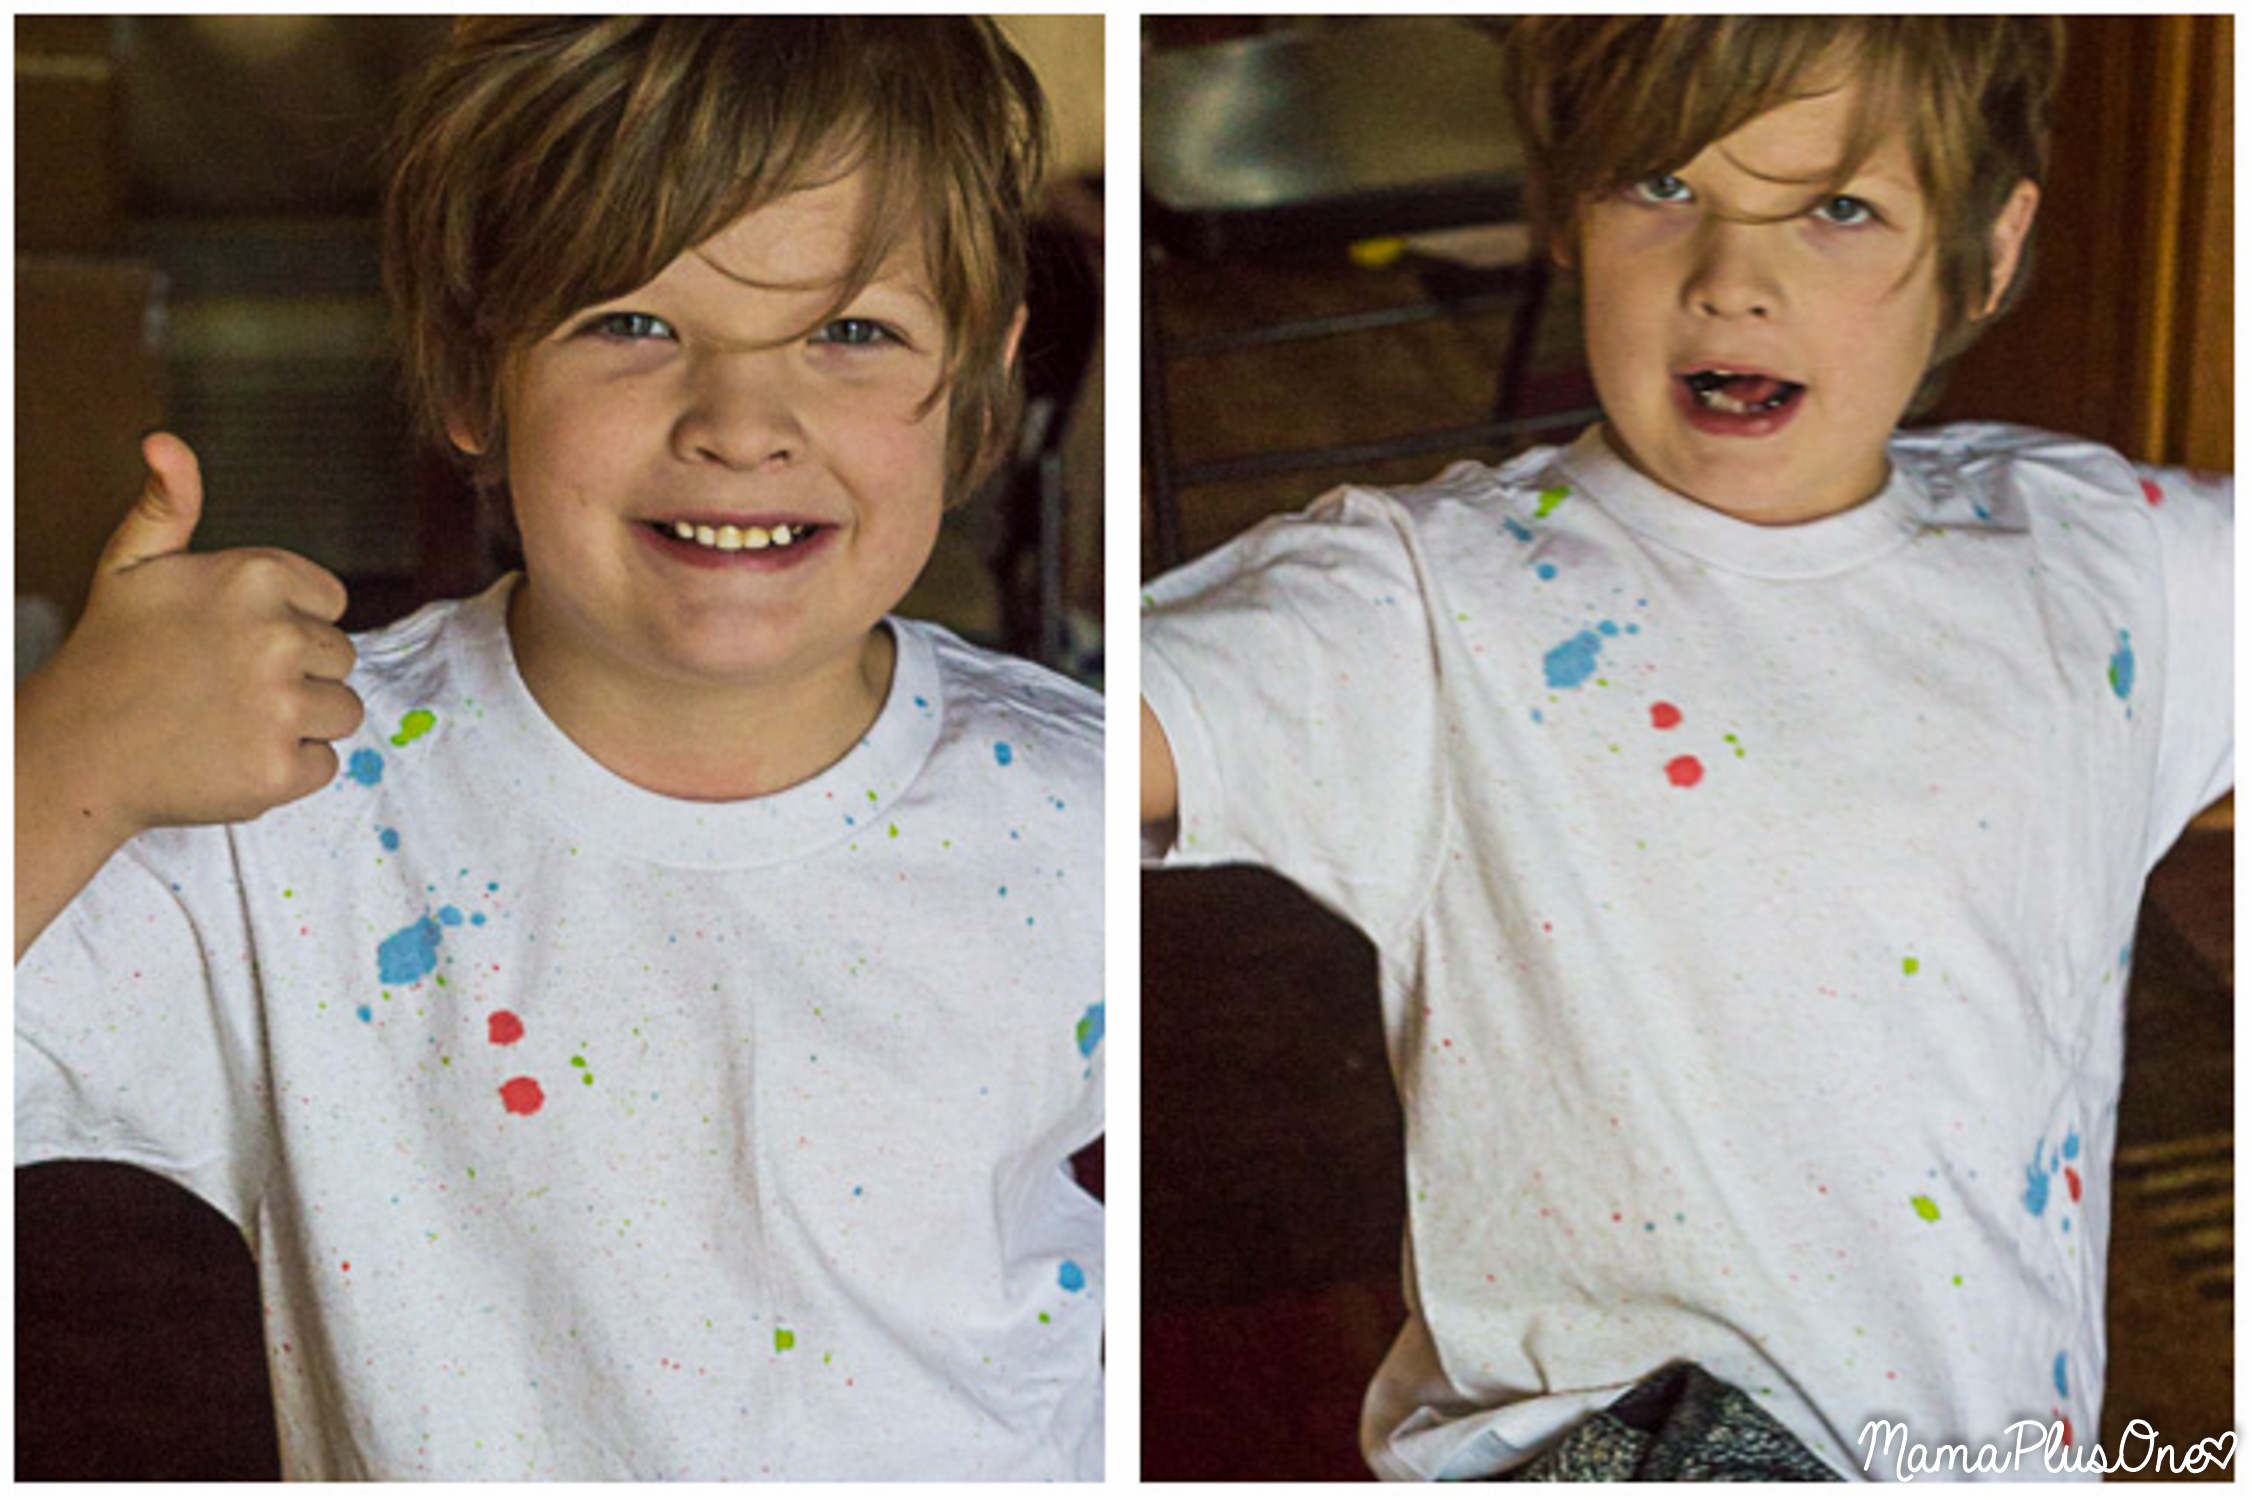 When kids grow way too fast, it's impossible to keep up with buying tee shirts to reflect the latest trends. Get this easy, on-trend speckled look with this DIY tee shirt, then keep it clean with the affordable Member's Mark Laundry Detergent. #MembersMarkDetergent [ad]